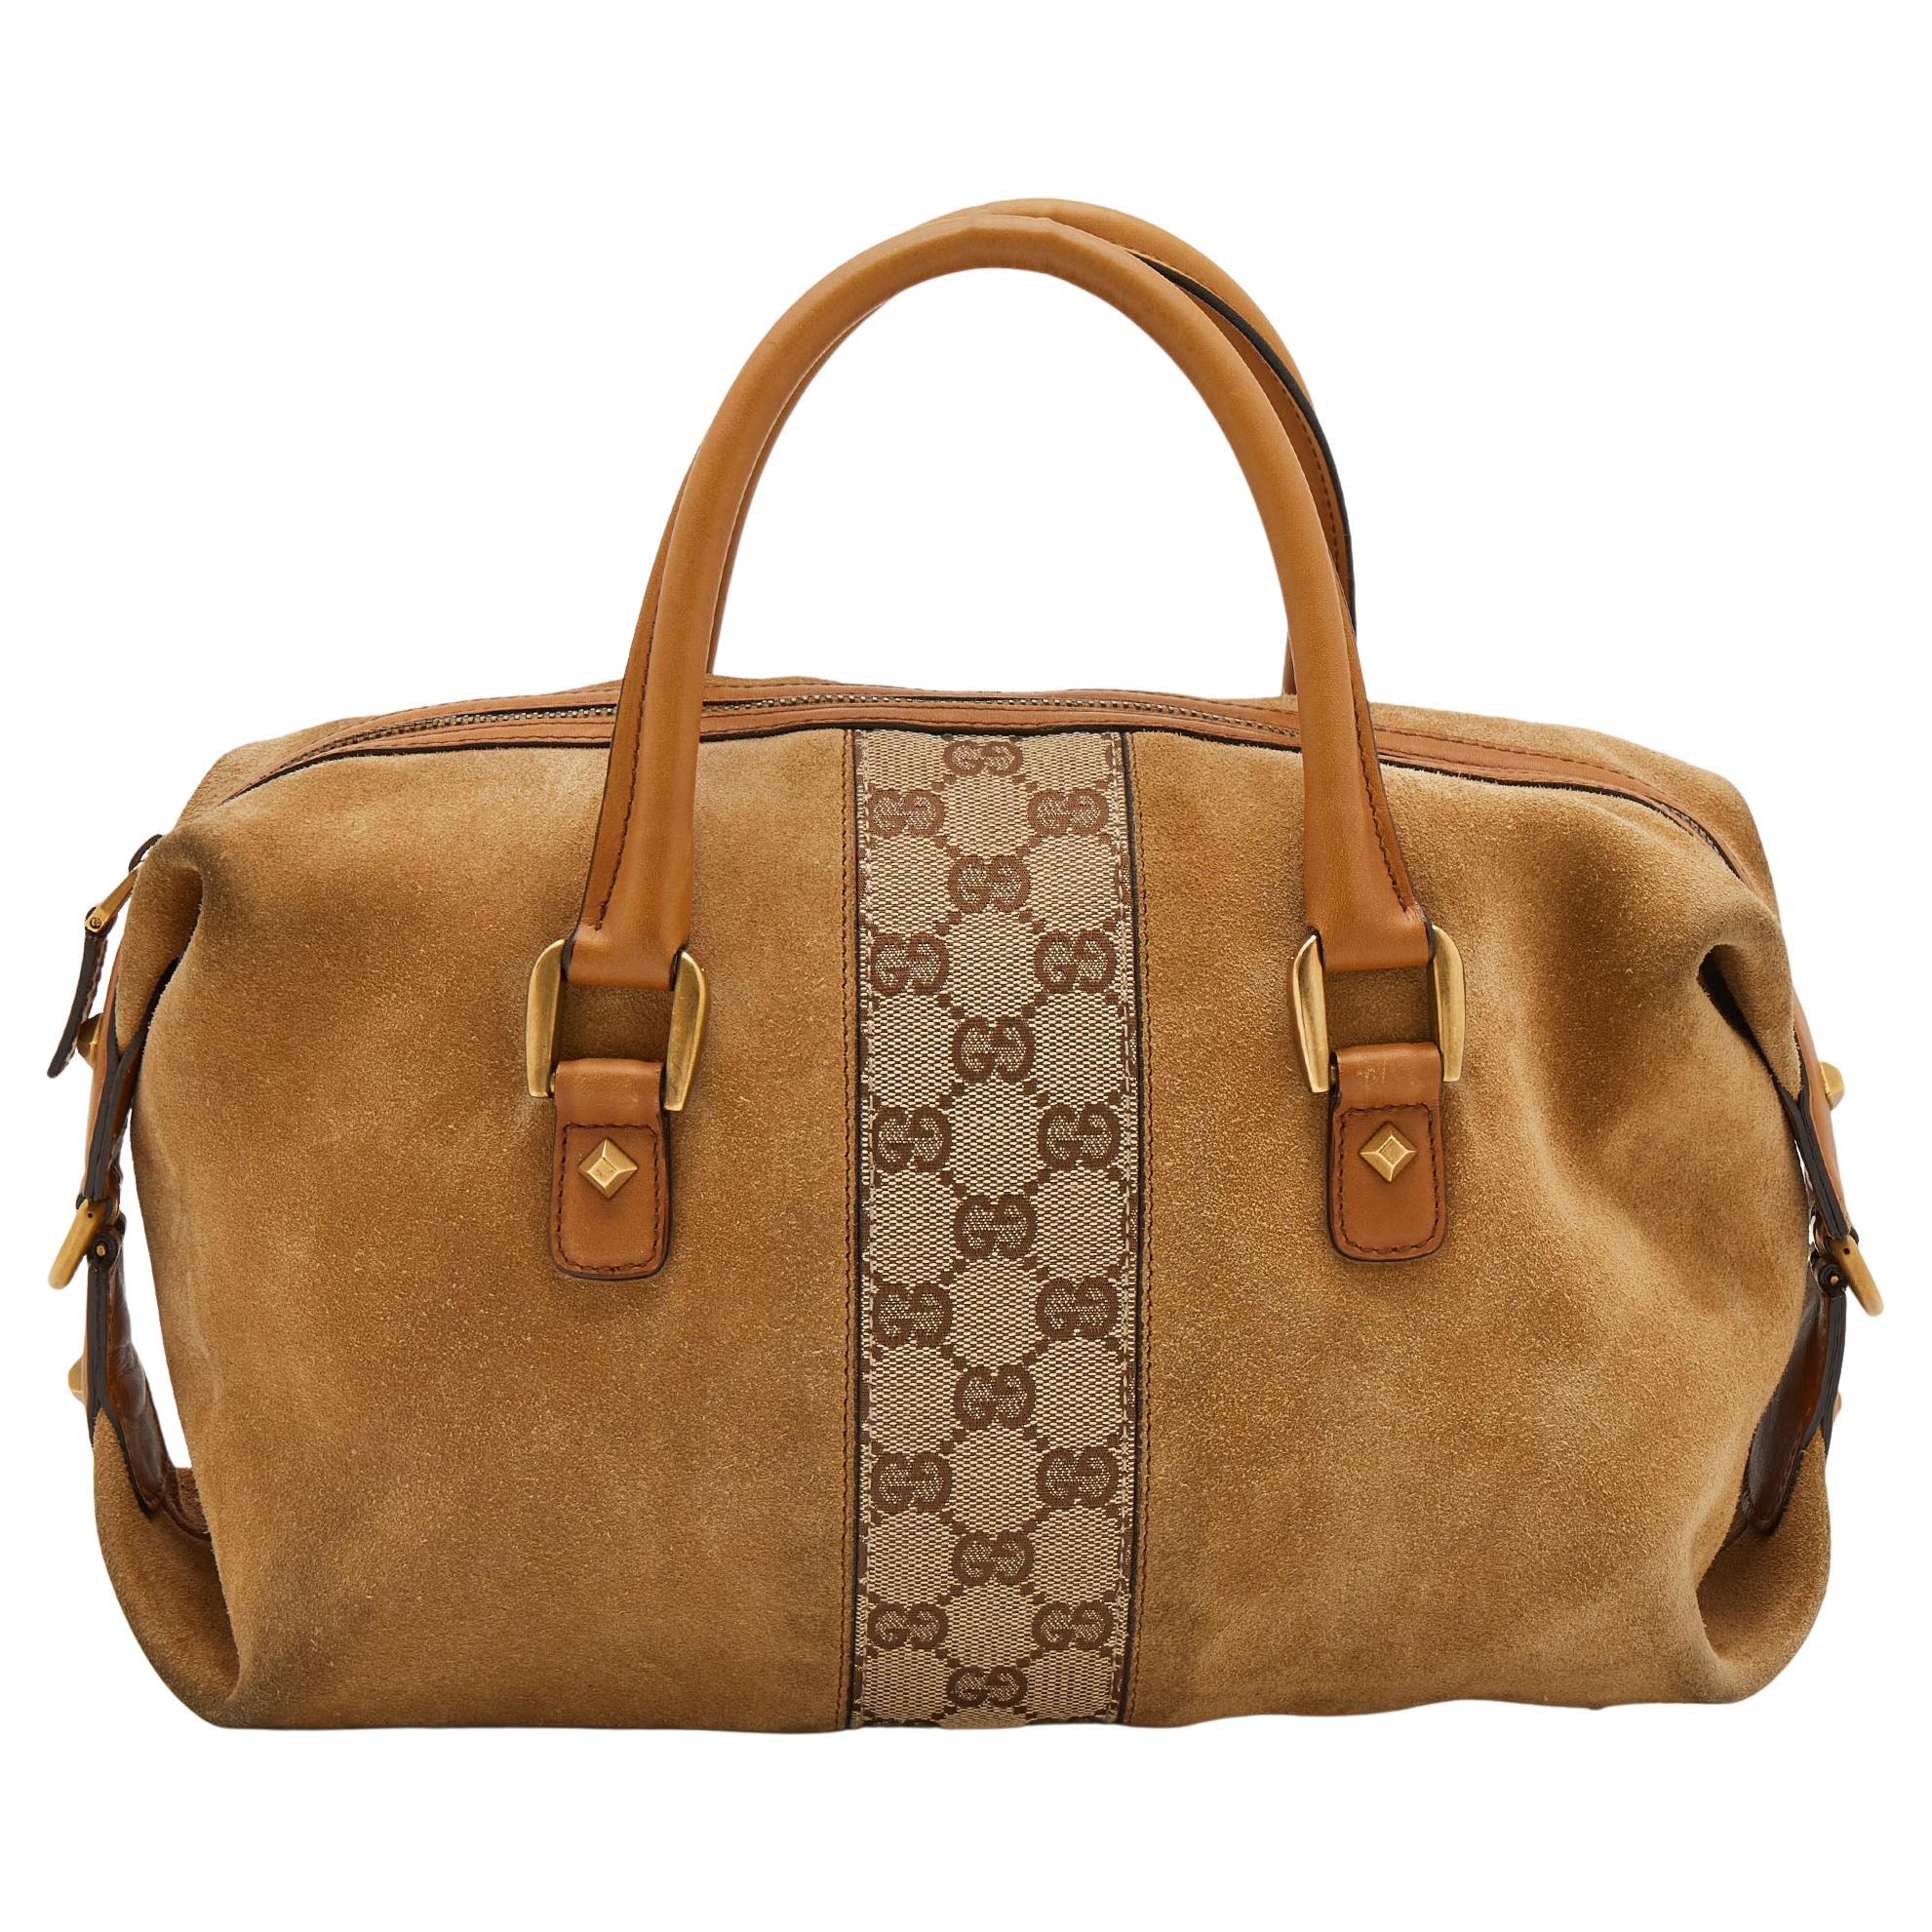 Gucci Beige/Tan GG Canvas And Suede Boston Bag